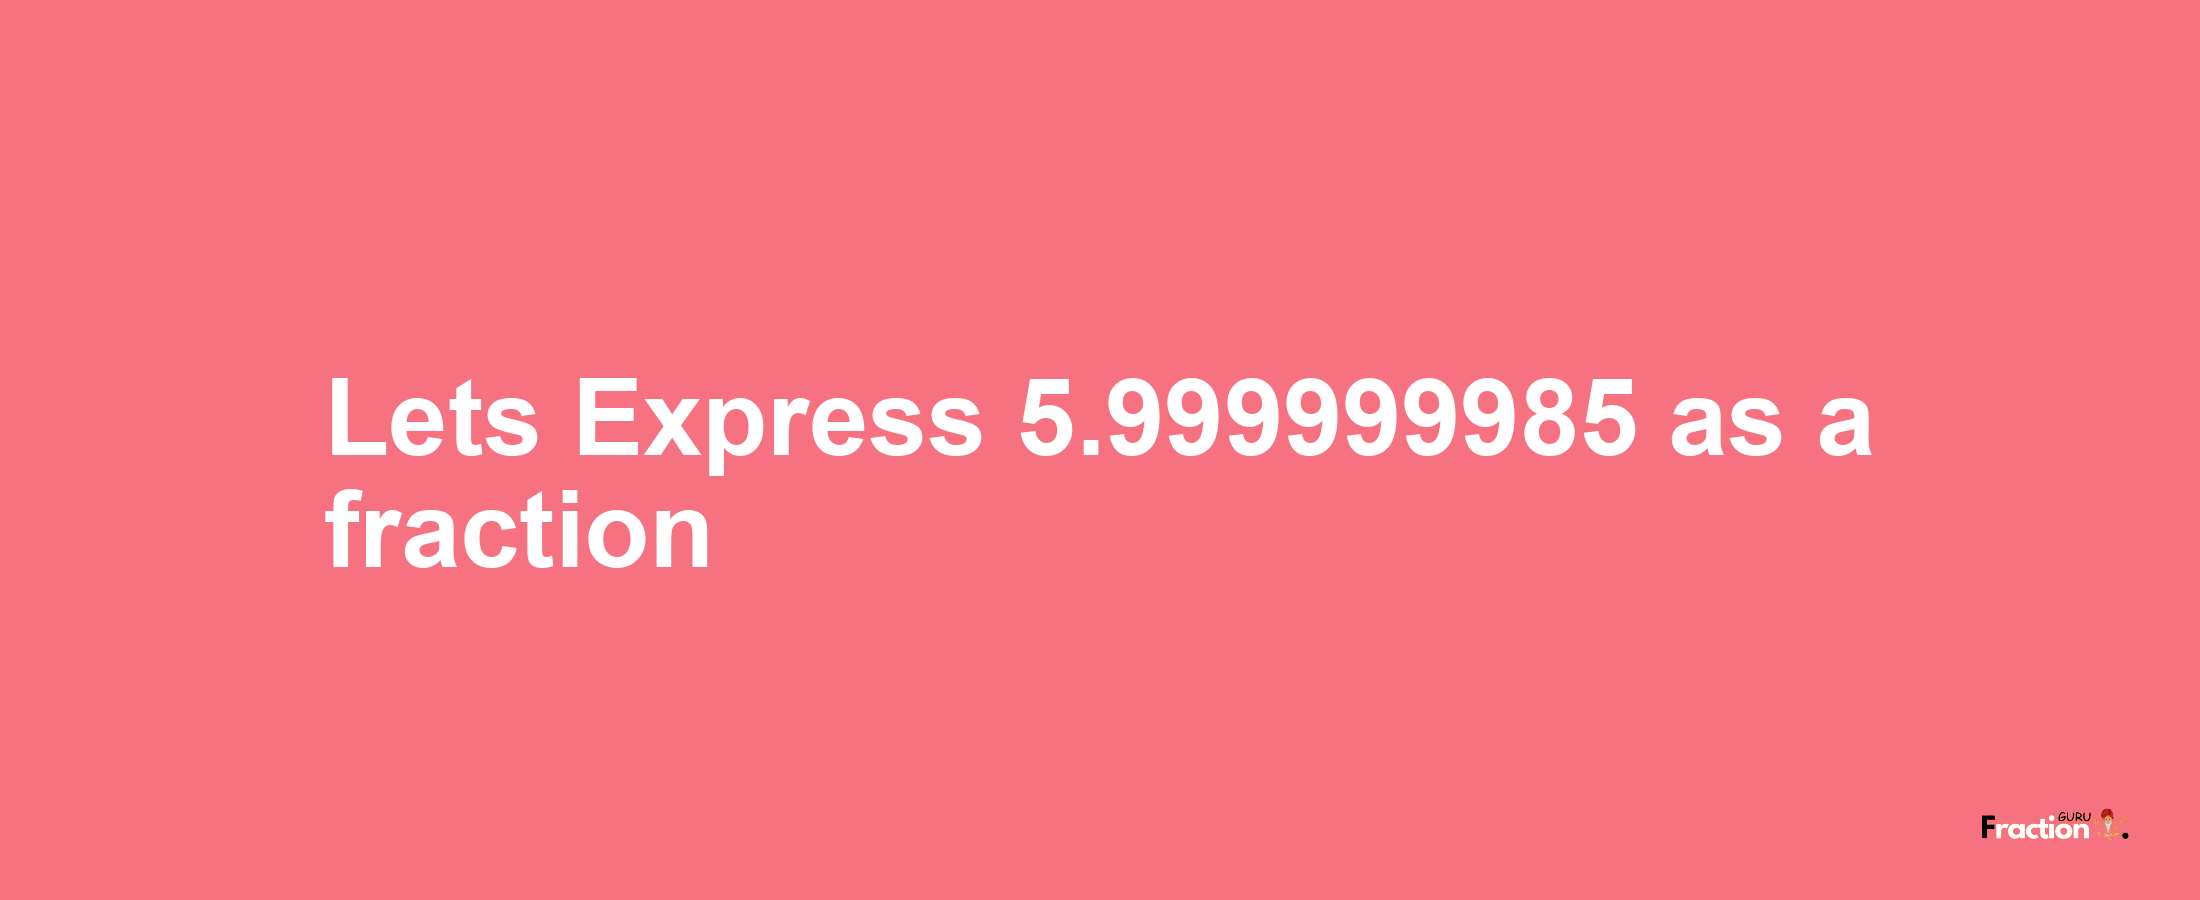 Lets Express 5.999999985 as afraction